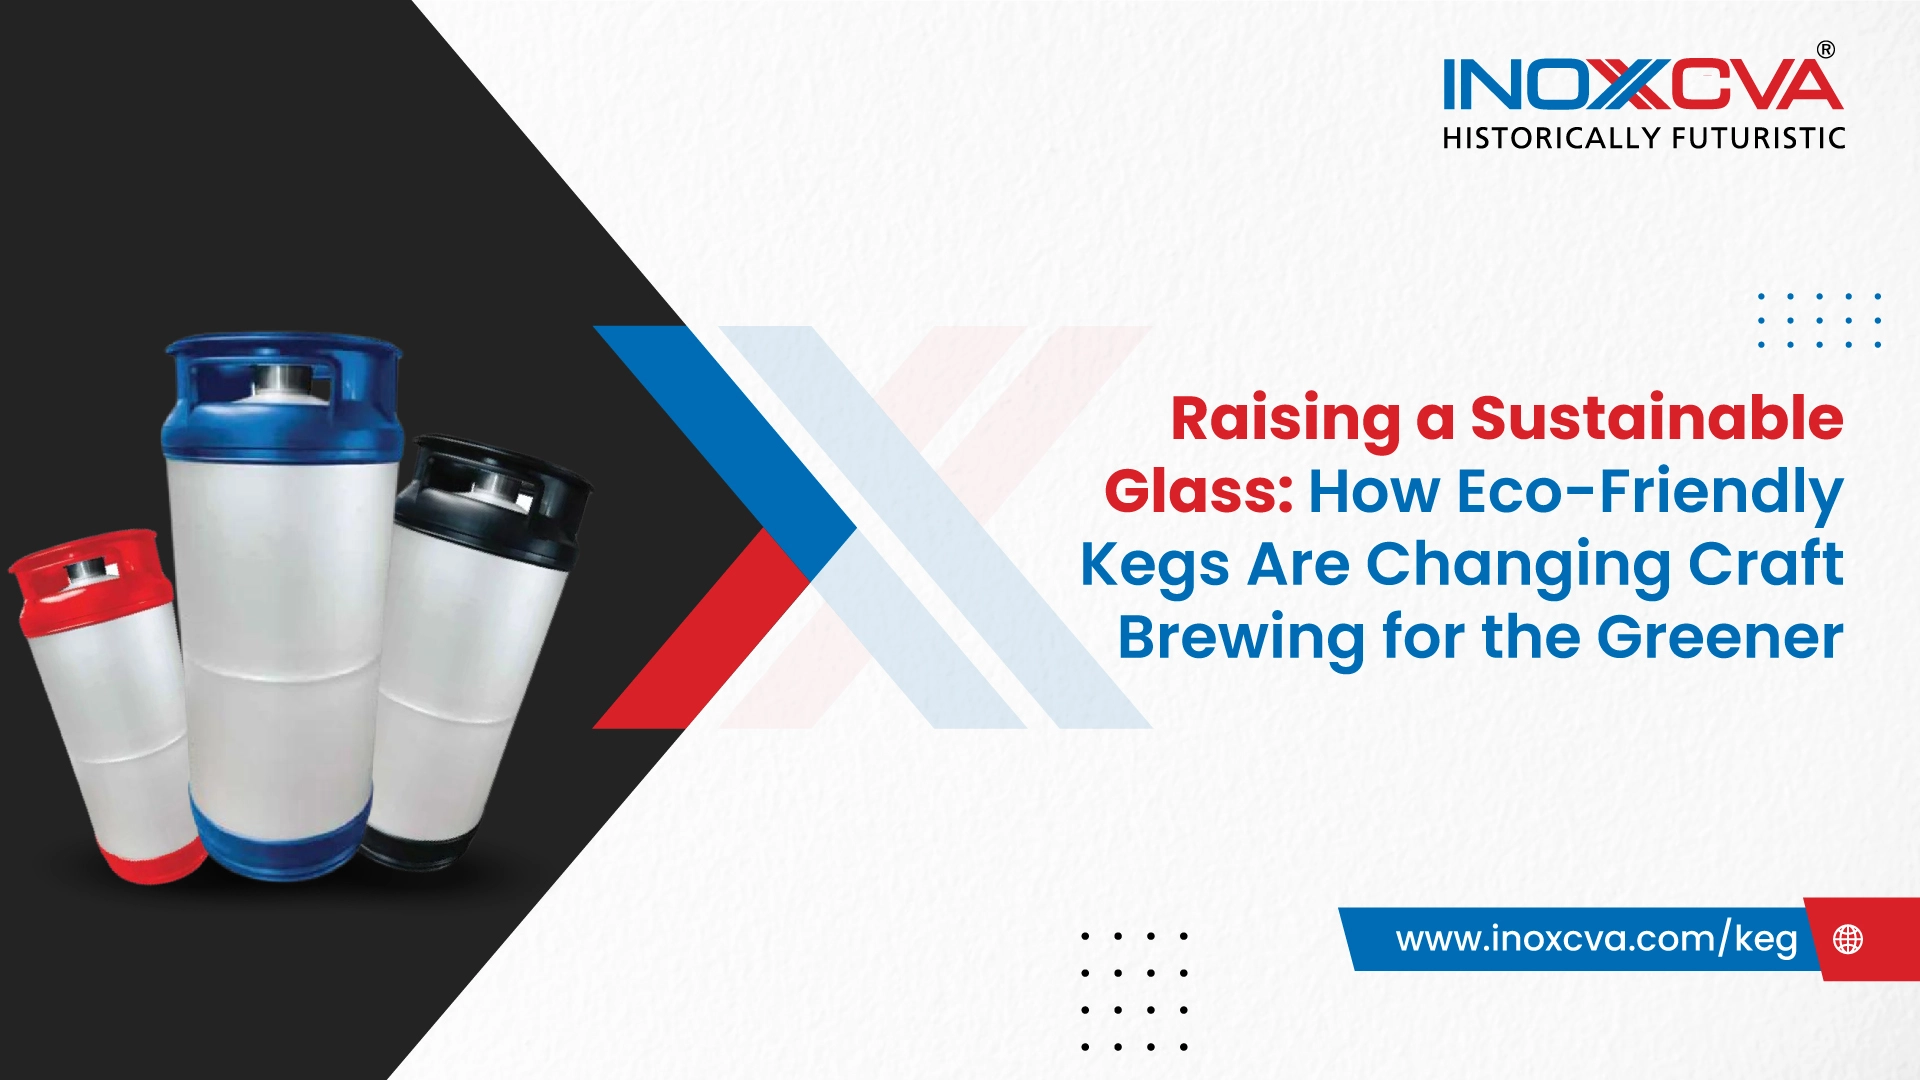 Raising a Sustainable Glass: How Eco-Friendly Kegs Are Changing Craft Brewing for the Greener
